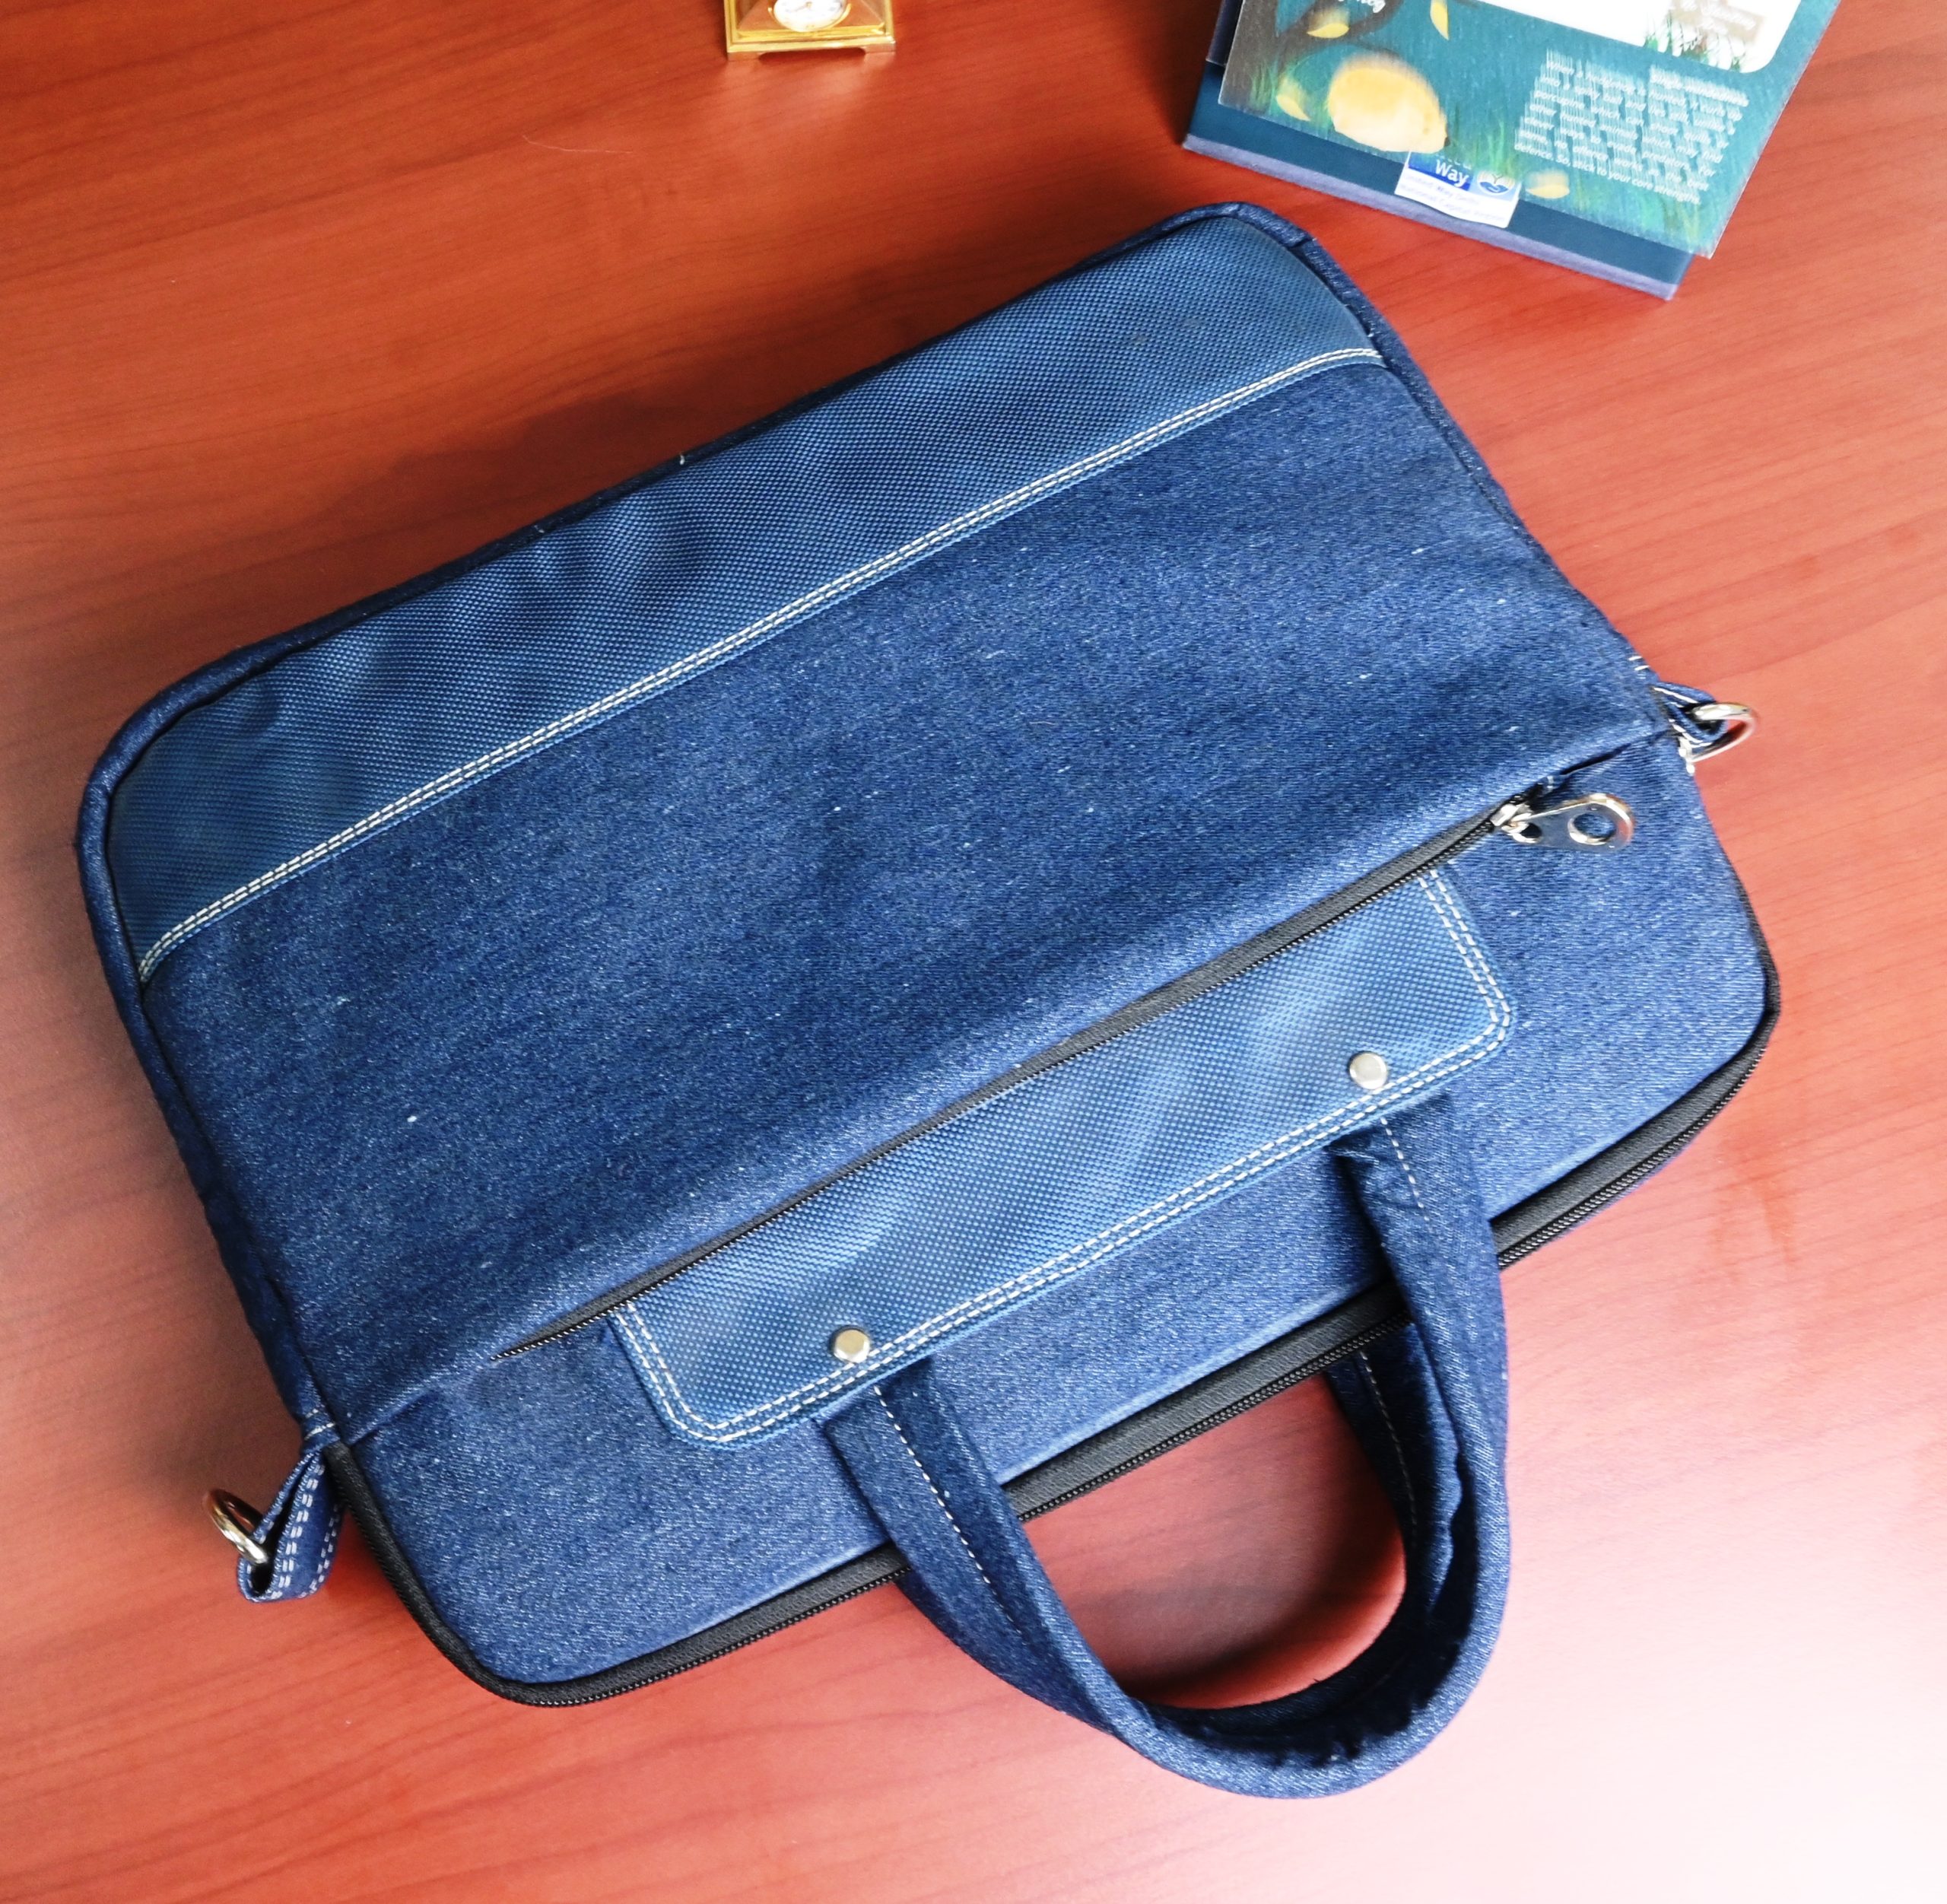 Bag Review: Baggallini Essential Laptop Tote - The Well-Appointed Desk